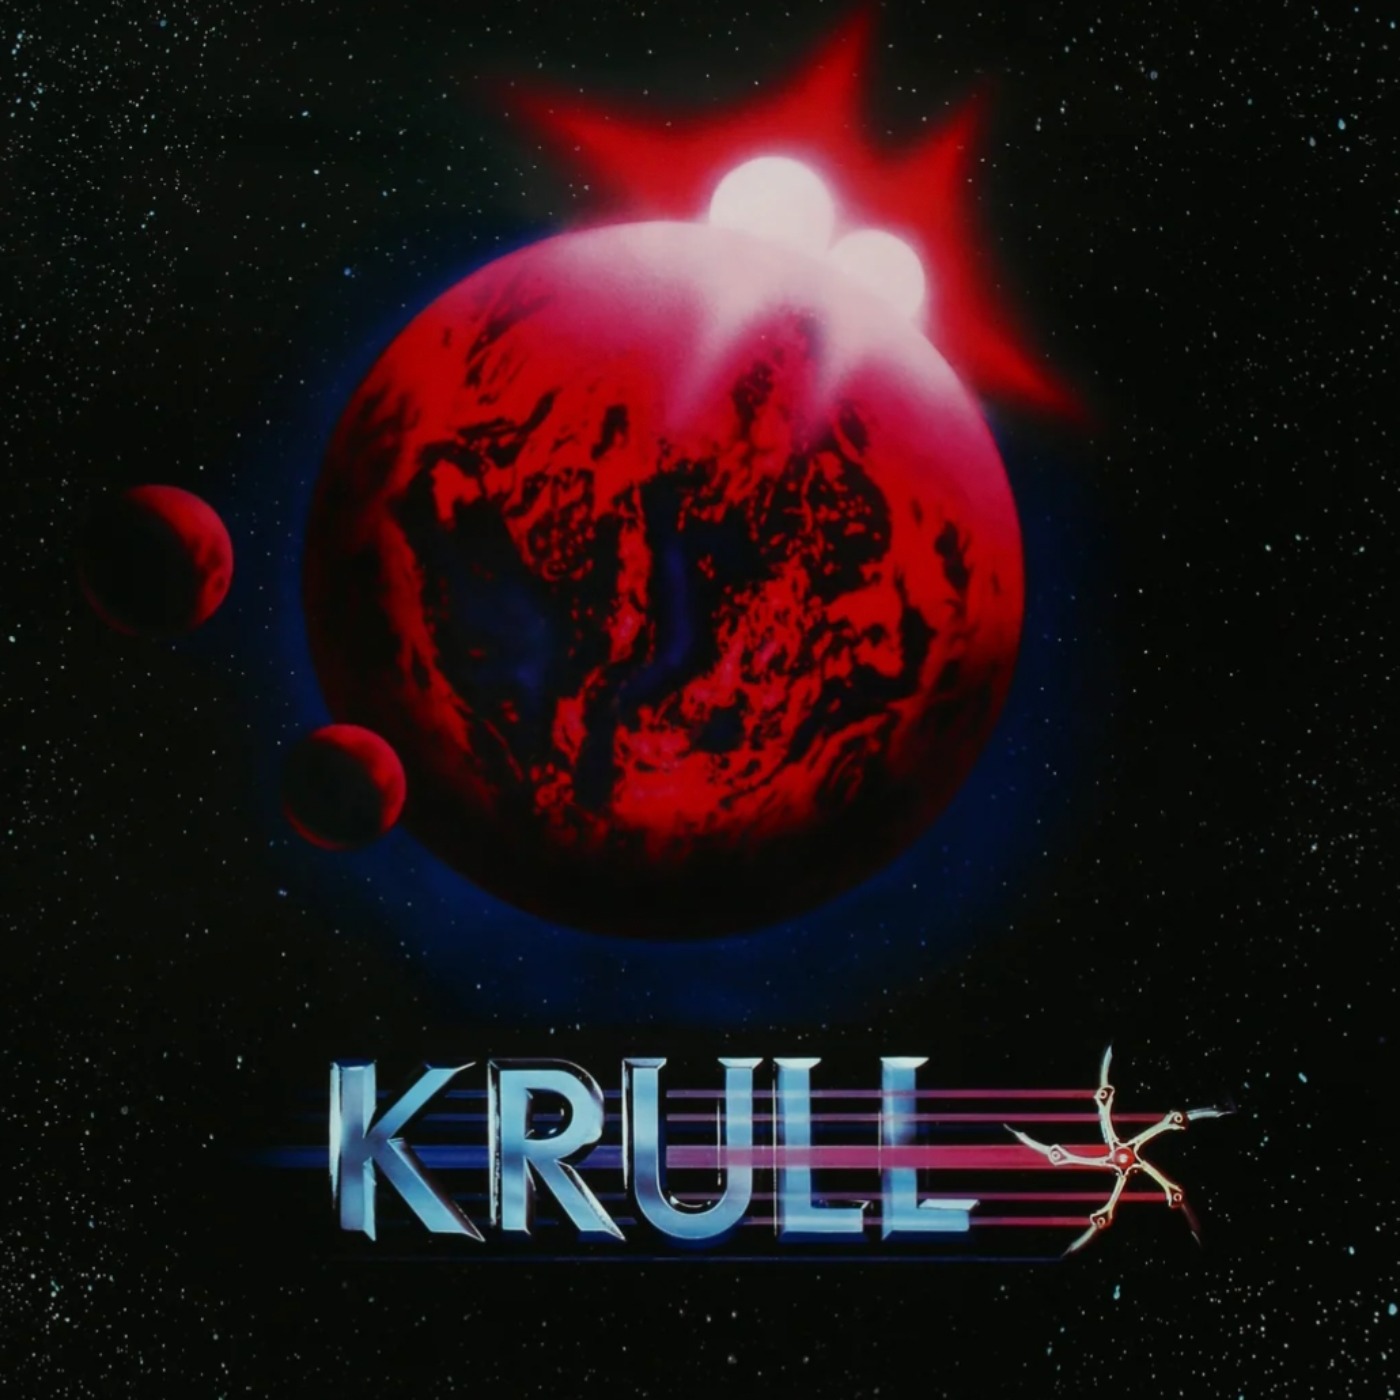 KRULL (PART ONE) with Dan Tetsell